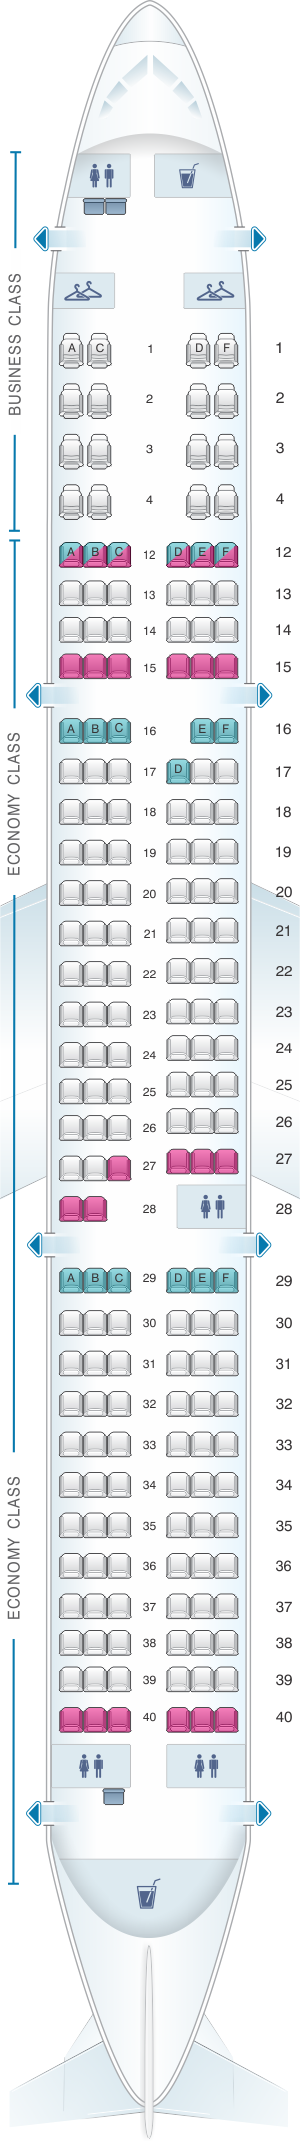 seat assignments on air canada